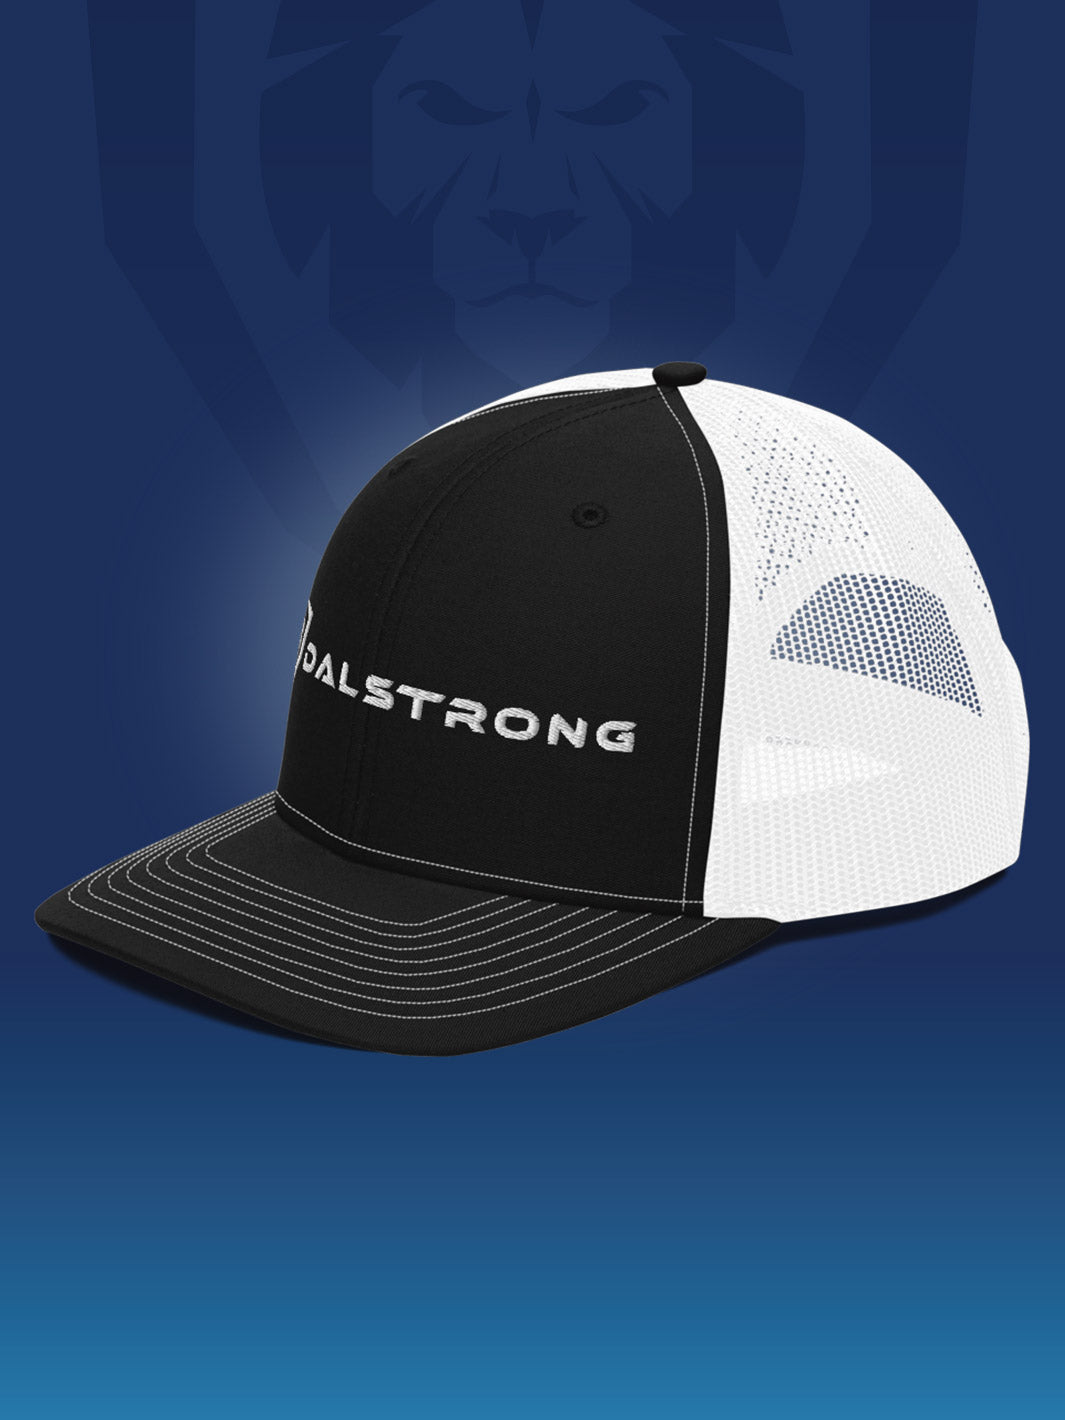 Dalstrong apparel trucker cap classic logo side angle.